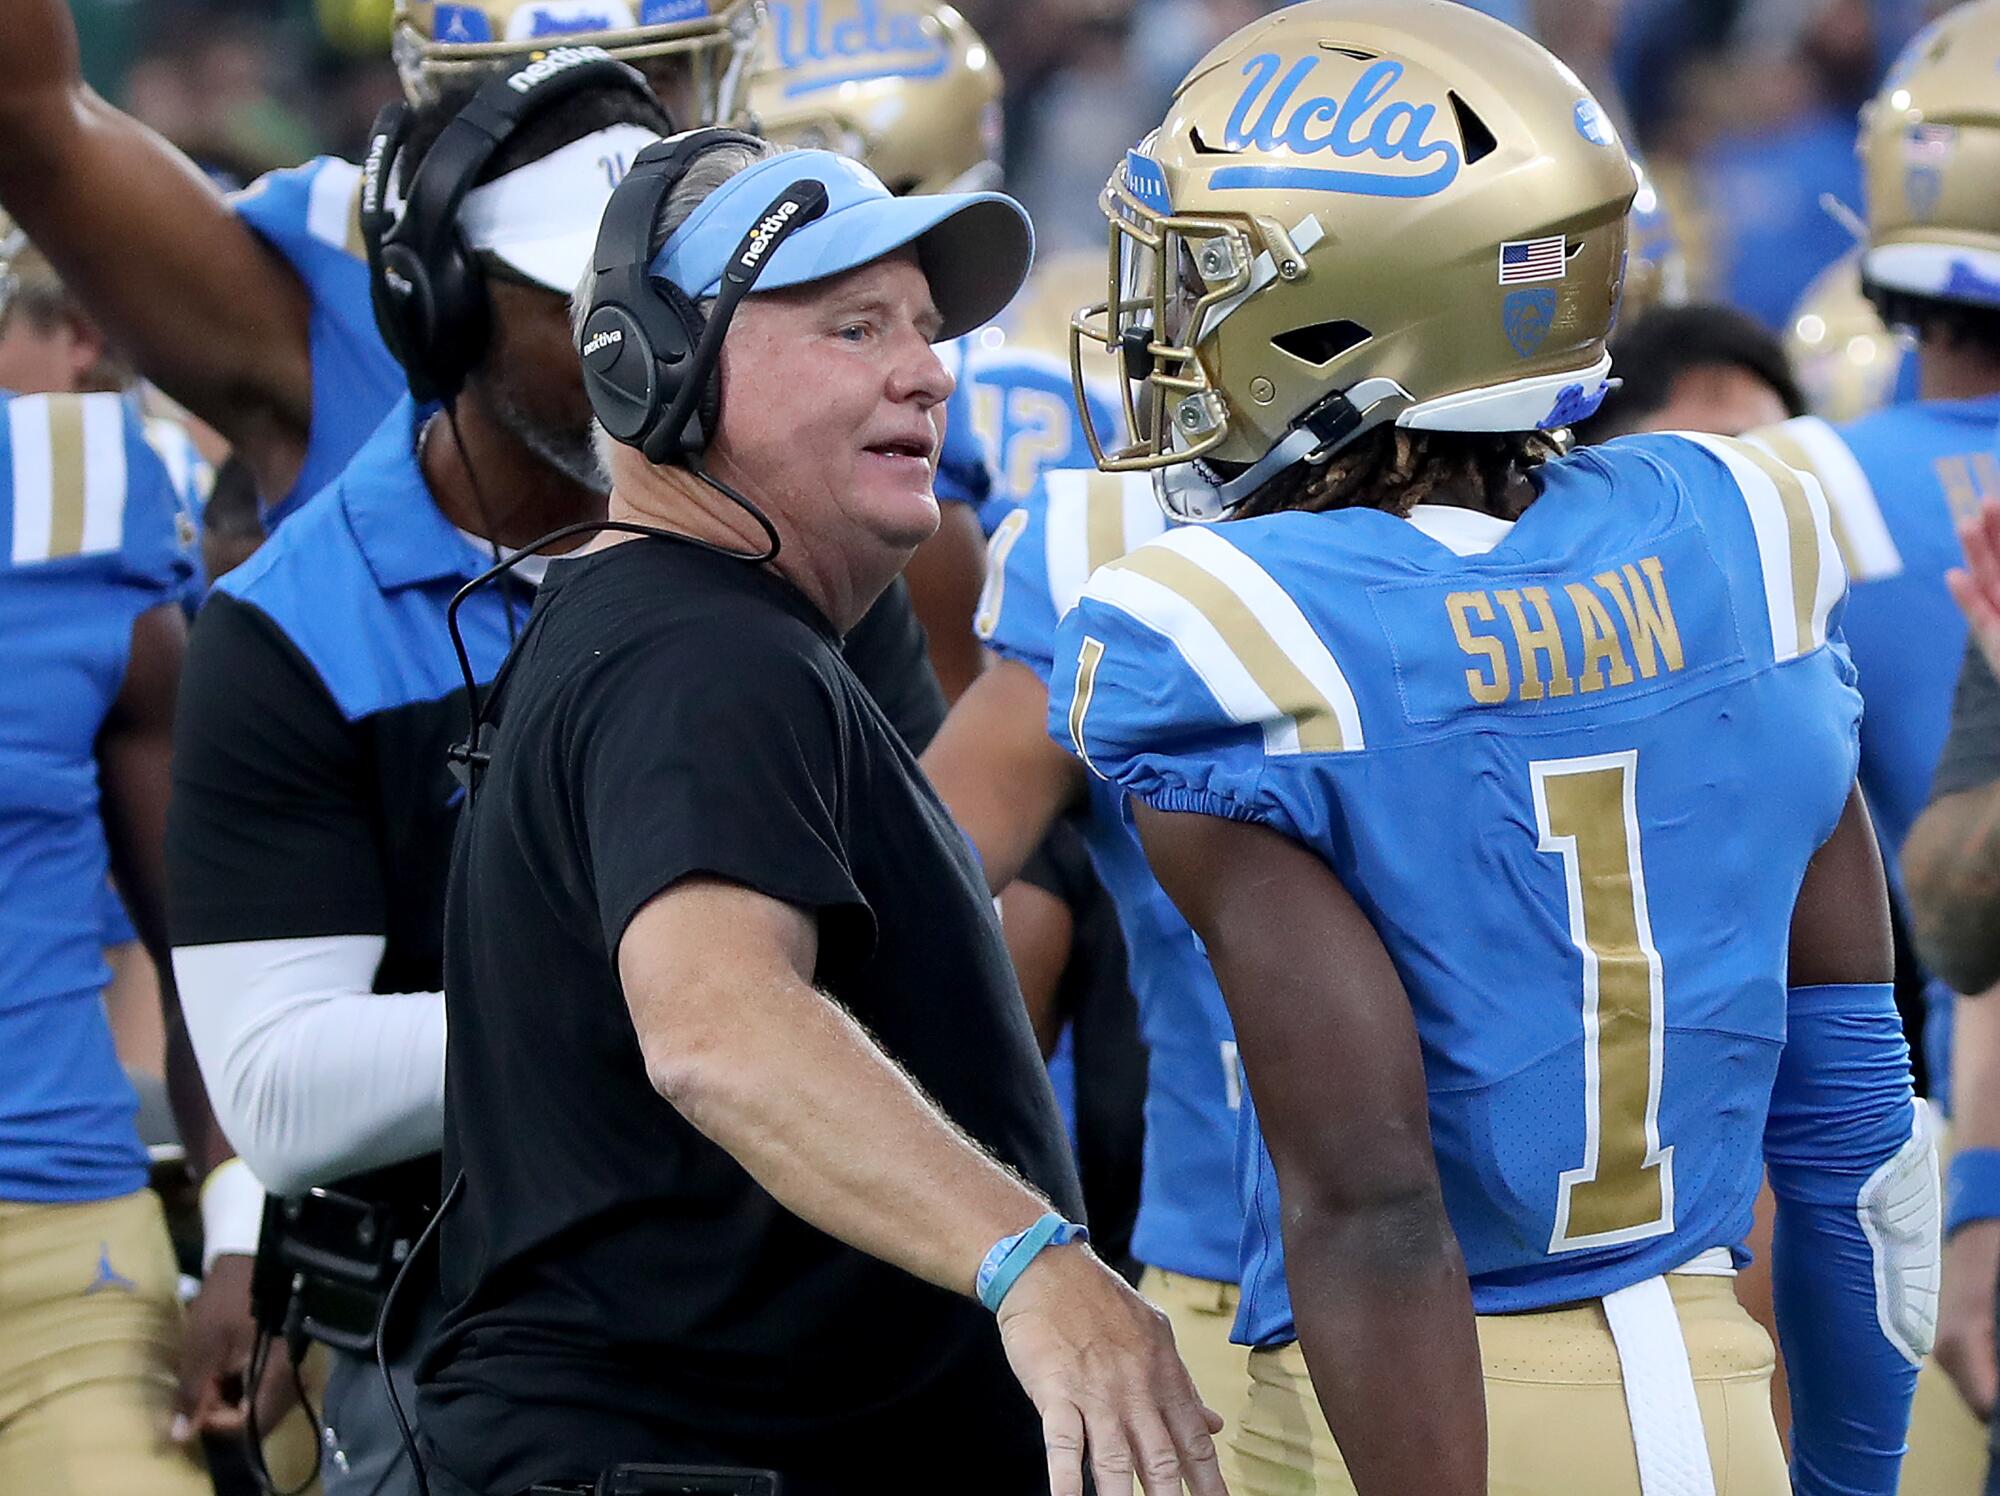  Jay Shaw is congratulated by head coach Chip Kelly.